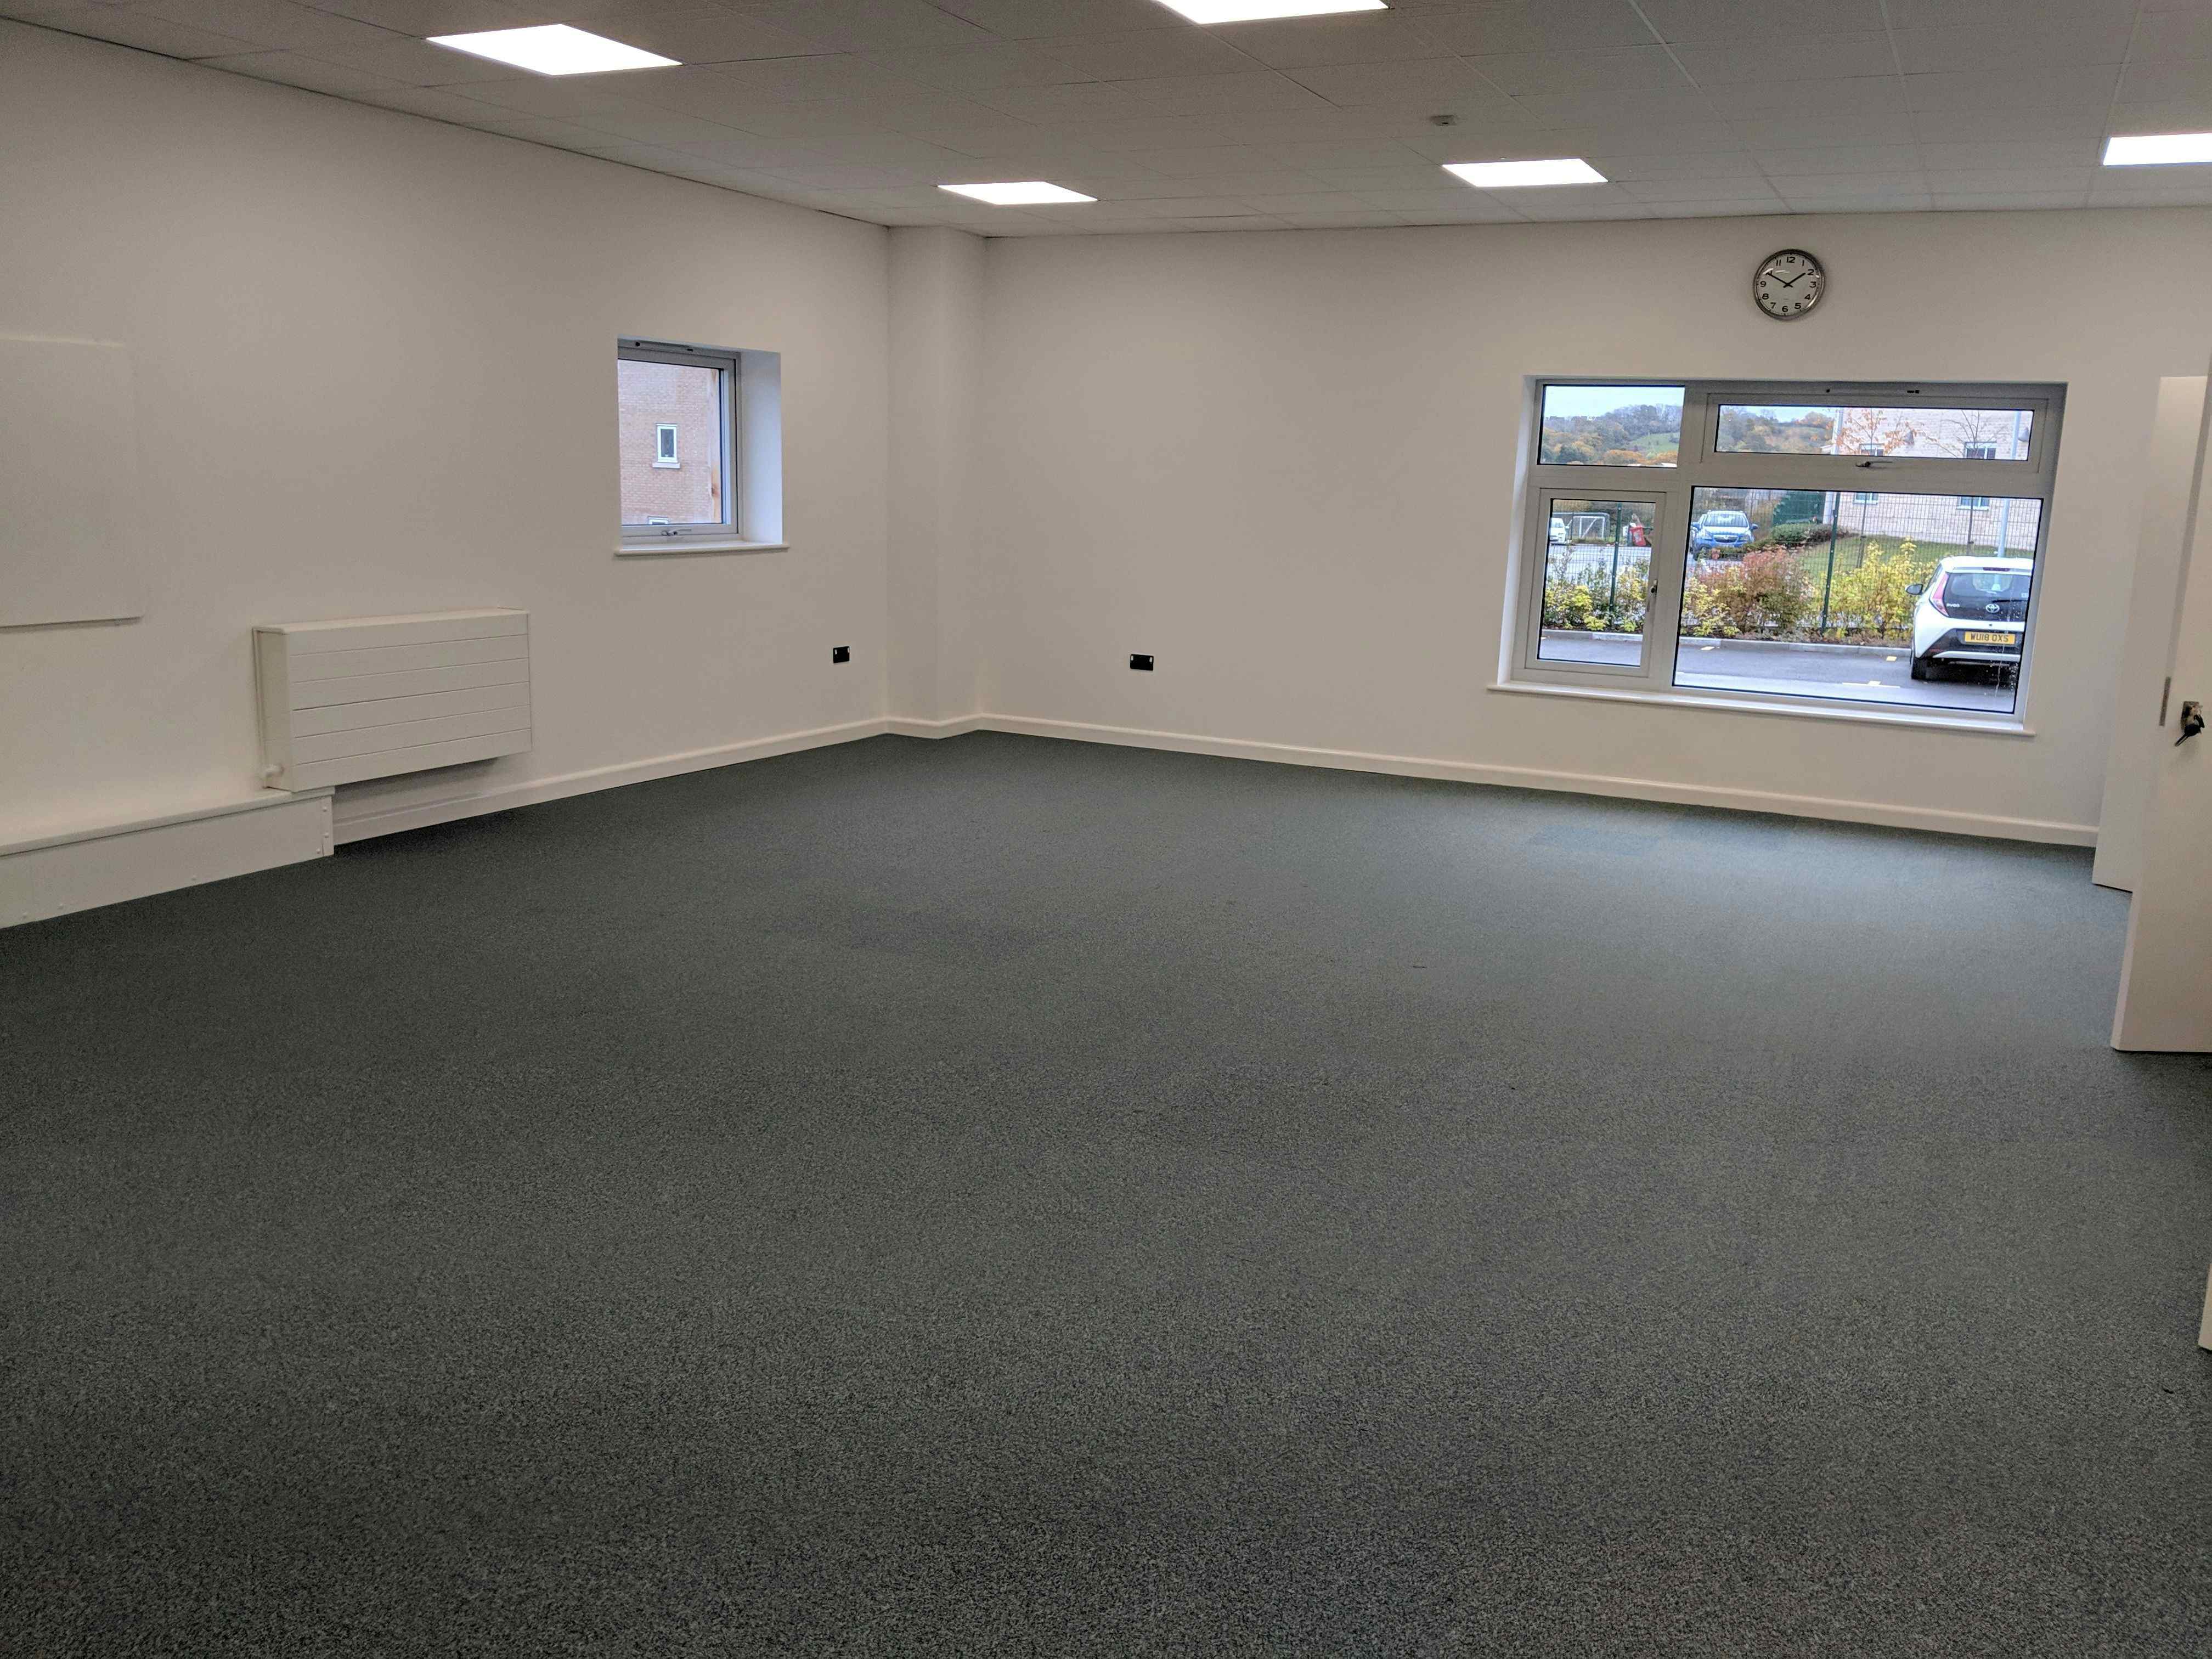 Meeting Room Two, Lyde Green Community Centre